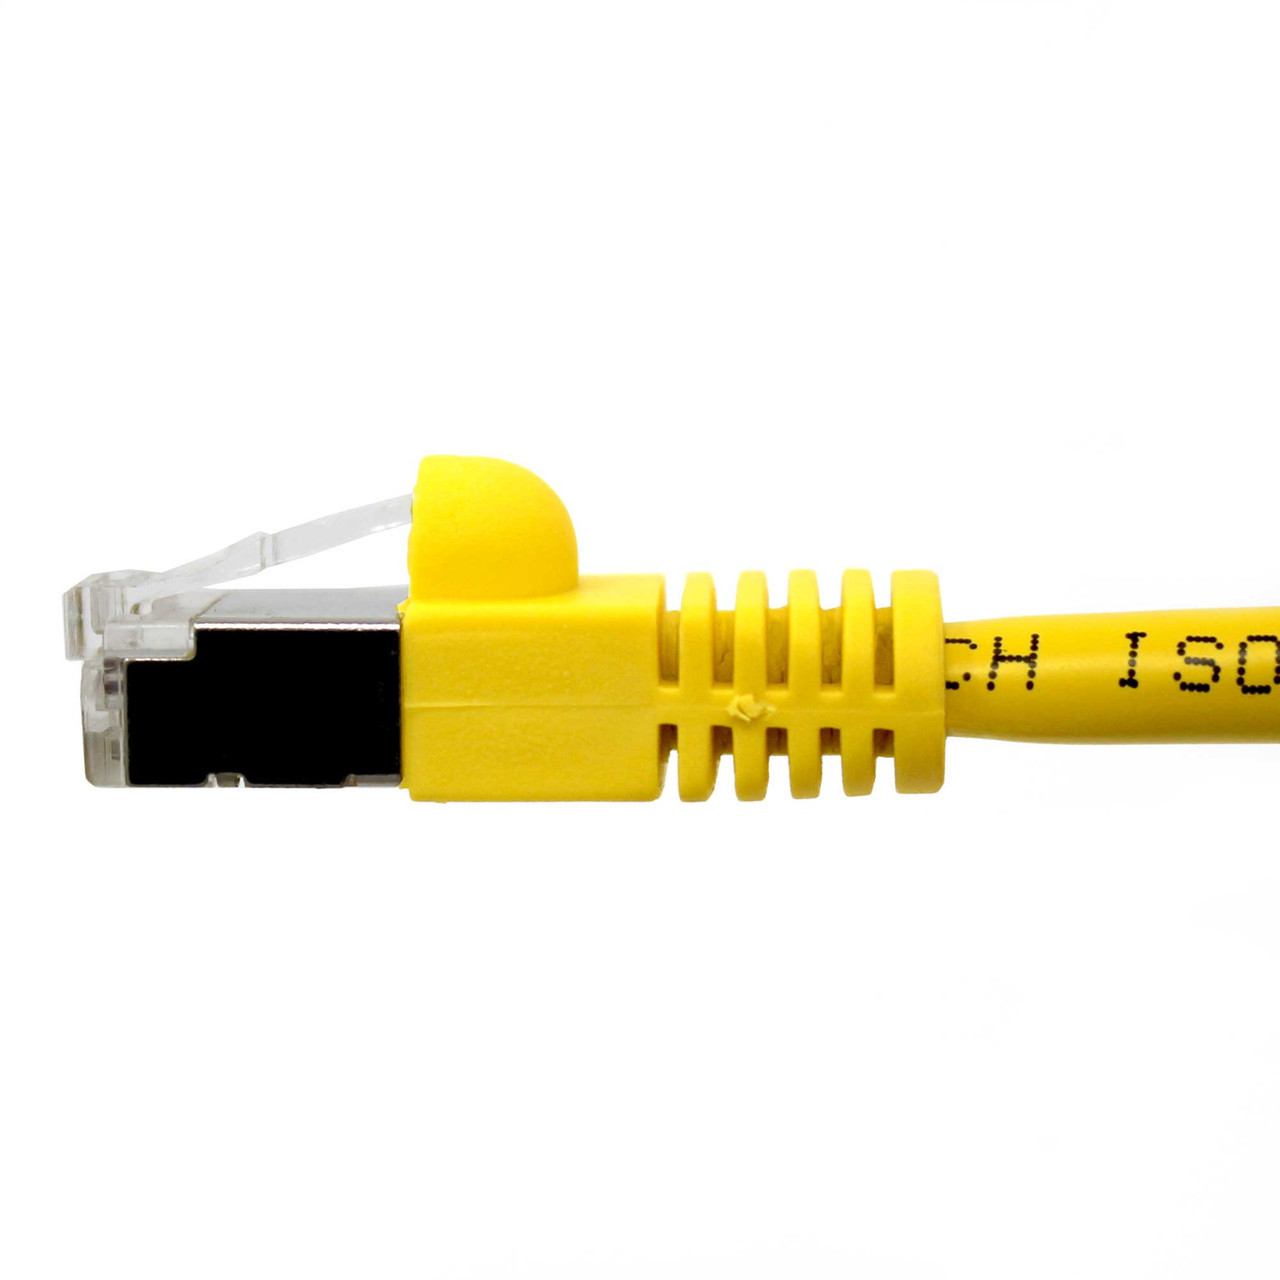 3m CAT6 RJ45 Ethernet Cable (Yellow)